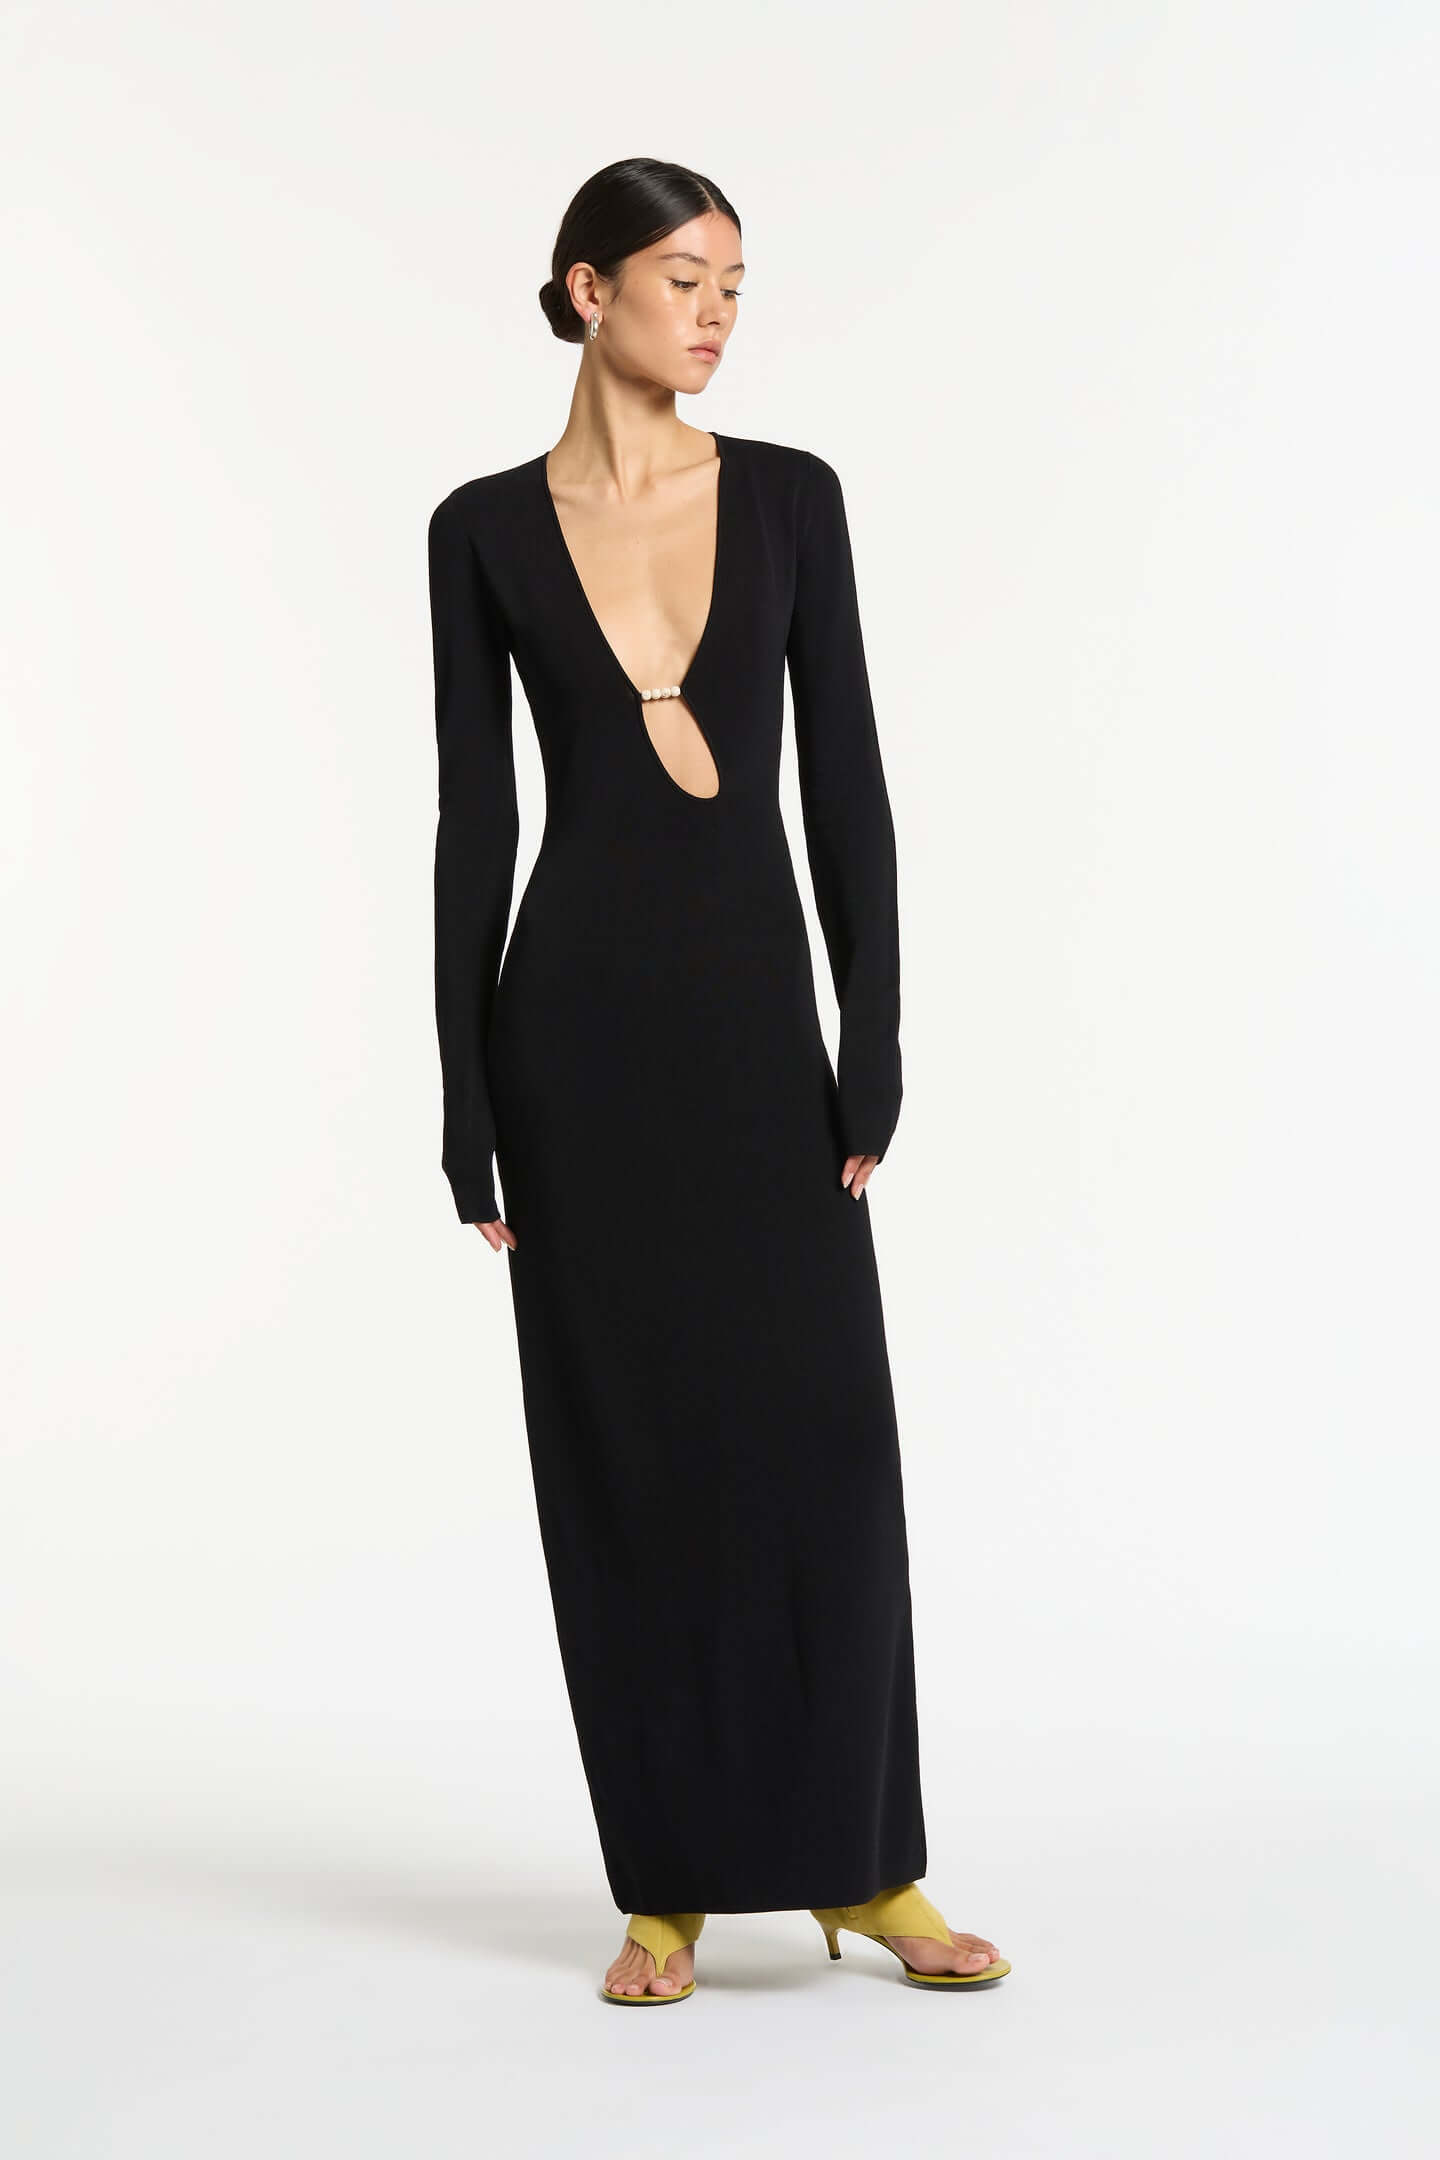 SIR Kinetic Beaded Long Sleeve Midi Dress in Black available at TNT The New Trend Australia